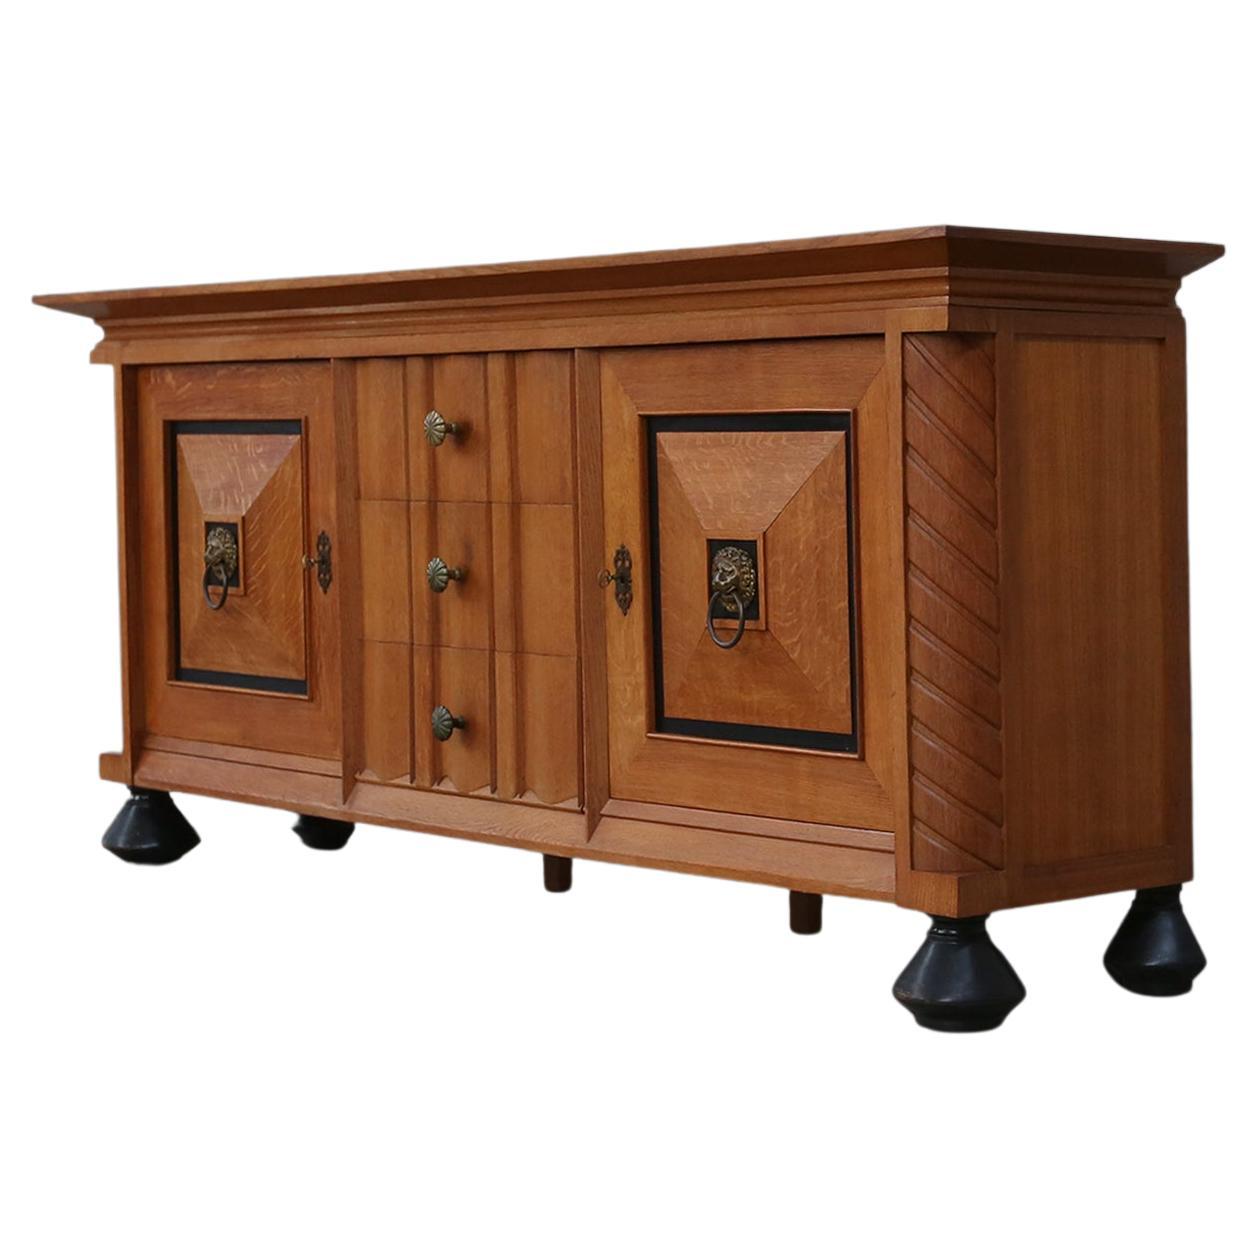 Belgian Late Art Deco Sideboard in Solid Oak and Brass Details For Sale